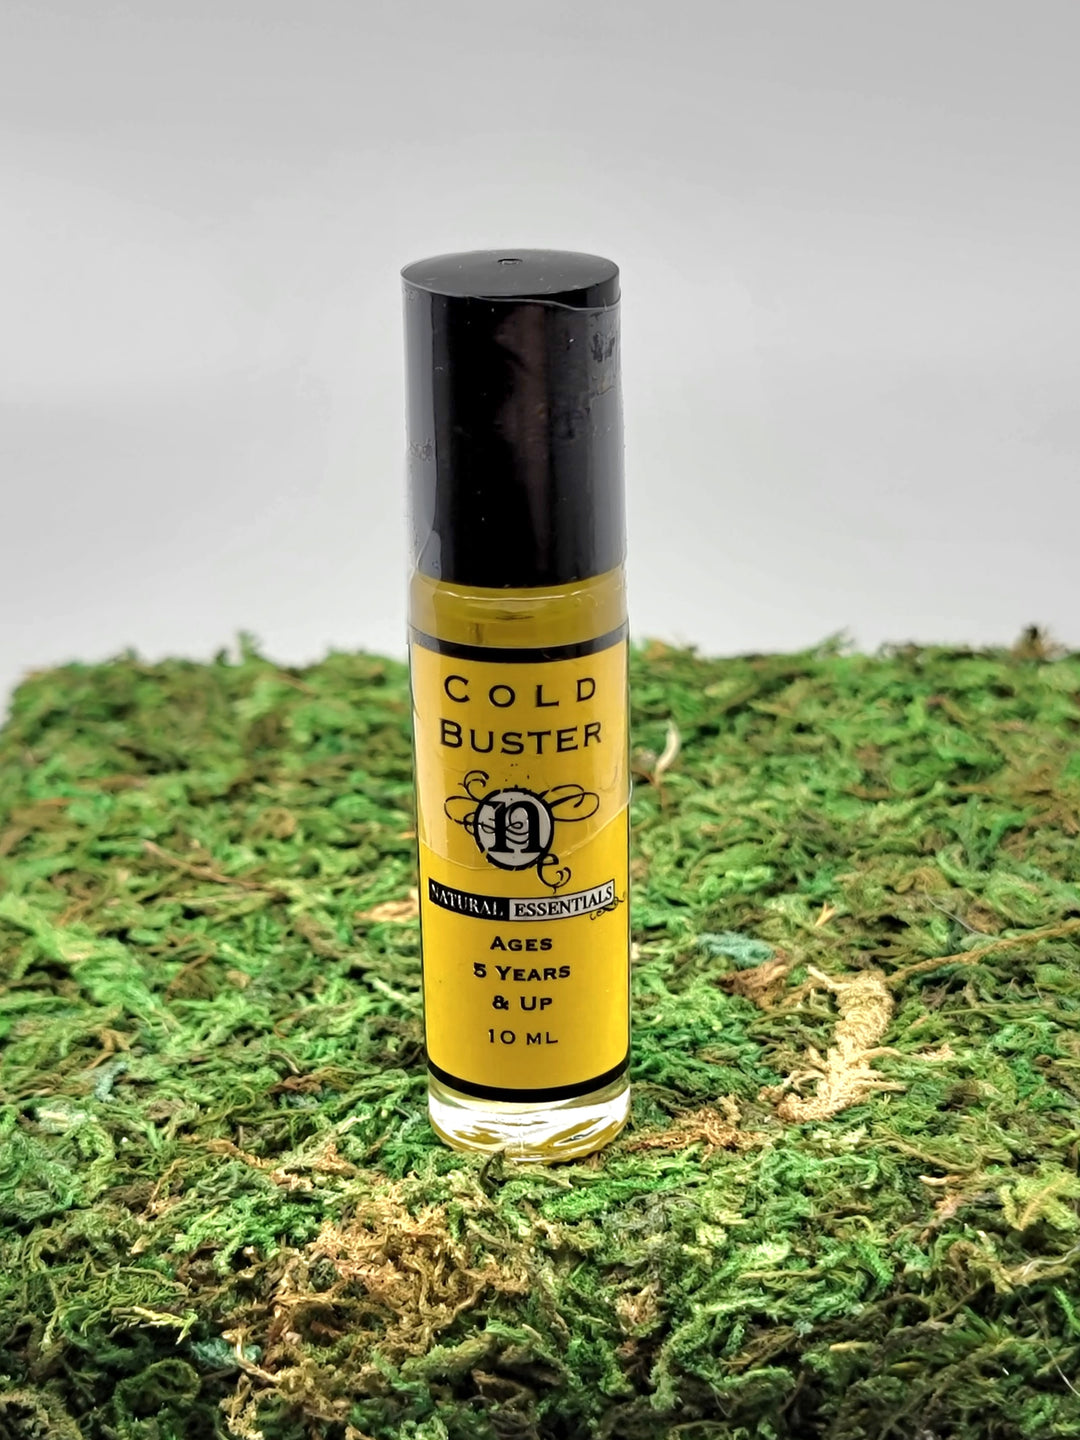 Cold Buster Essential Oil Roller - Geranium, Rosemary, Peppermint, Eucalyptus, Tea Tree and Thyme